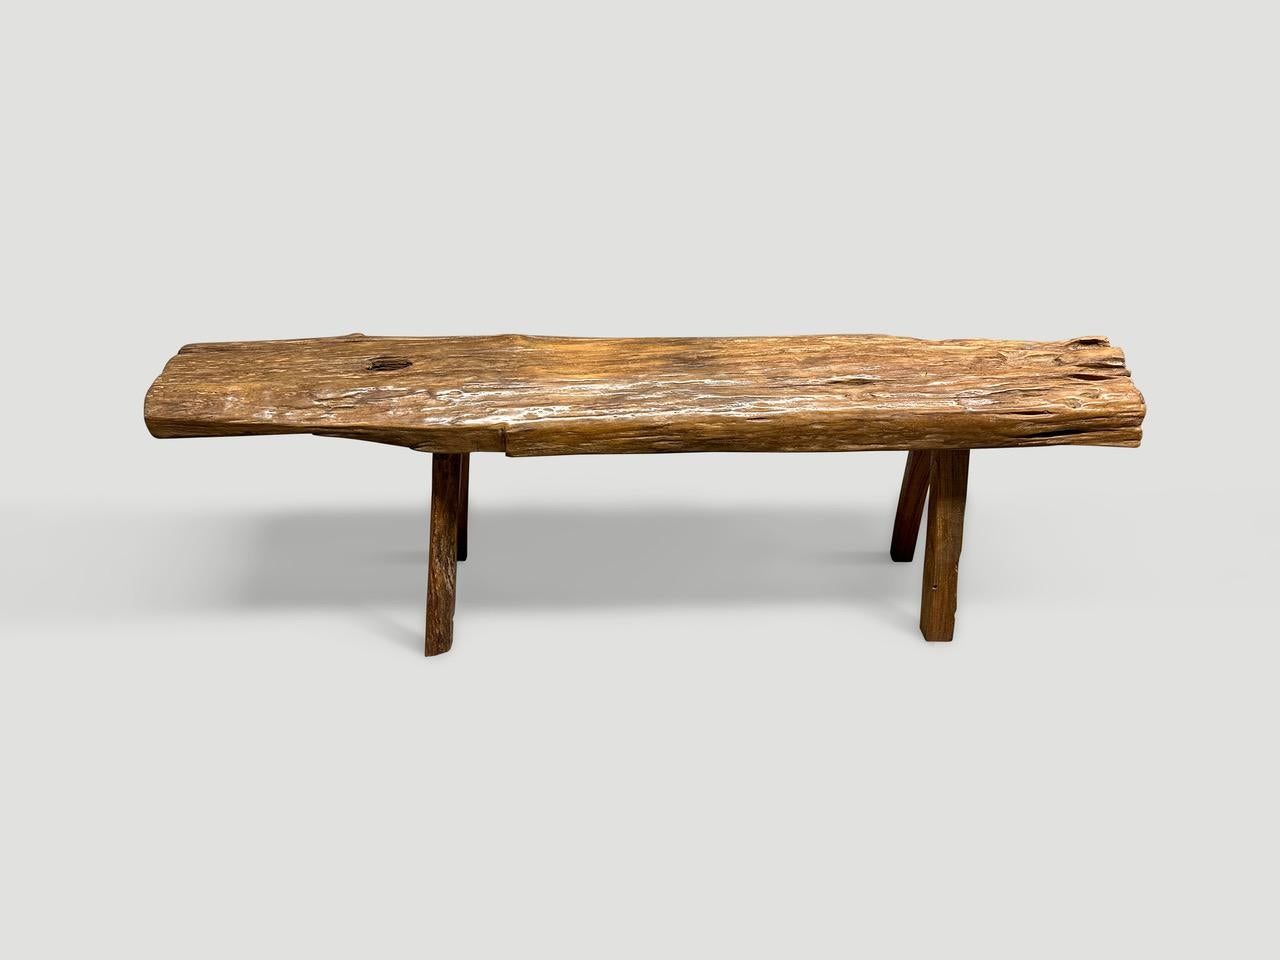 Antique bench with beautiful character hand made from a teak log with lovely patina. Circa 1950.

This bench was hand made in the spirit of Wabi-Sabi, a Japanese philosophy that beauty can be found in imperfection and impermanence. It is a beauty of